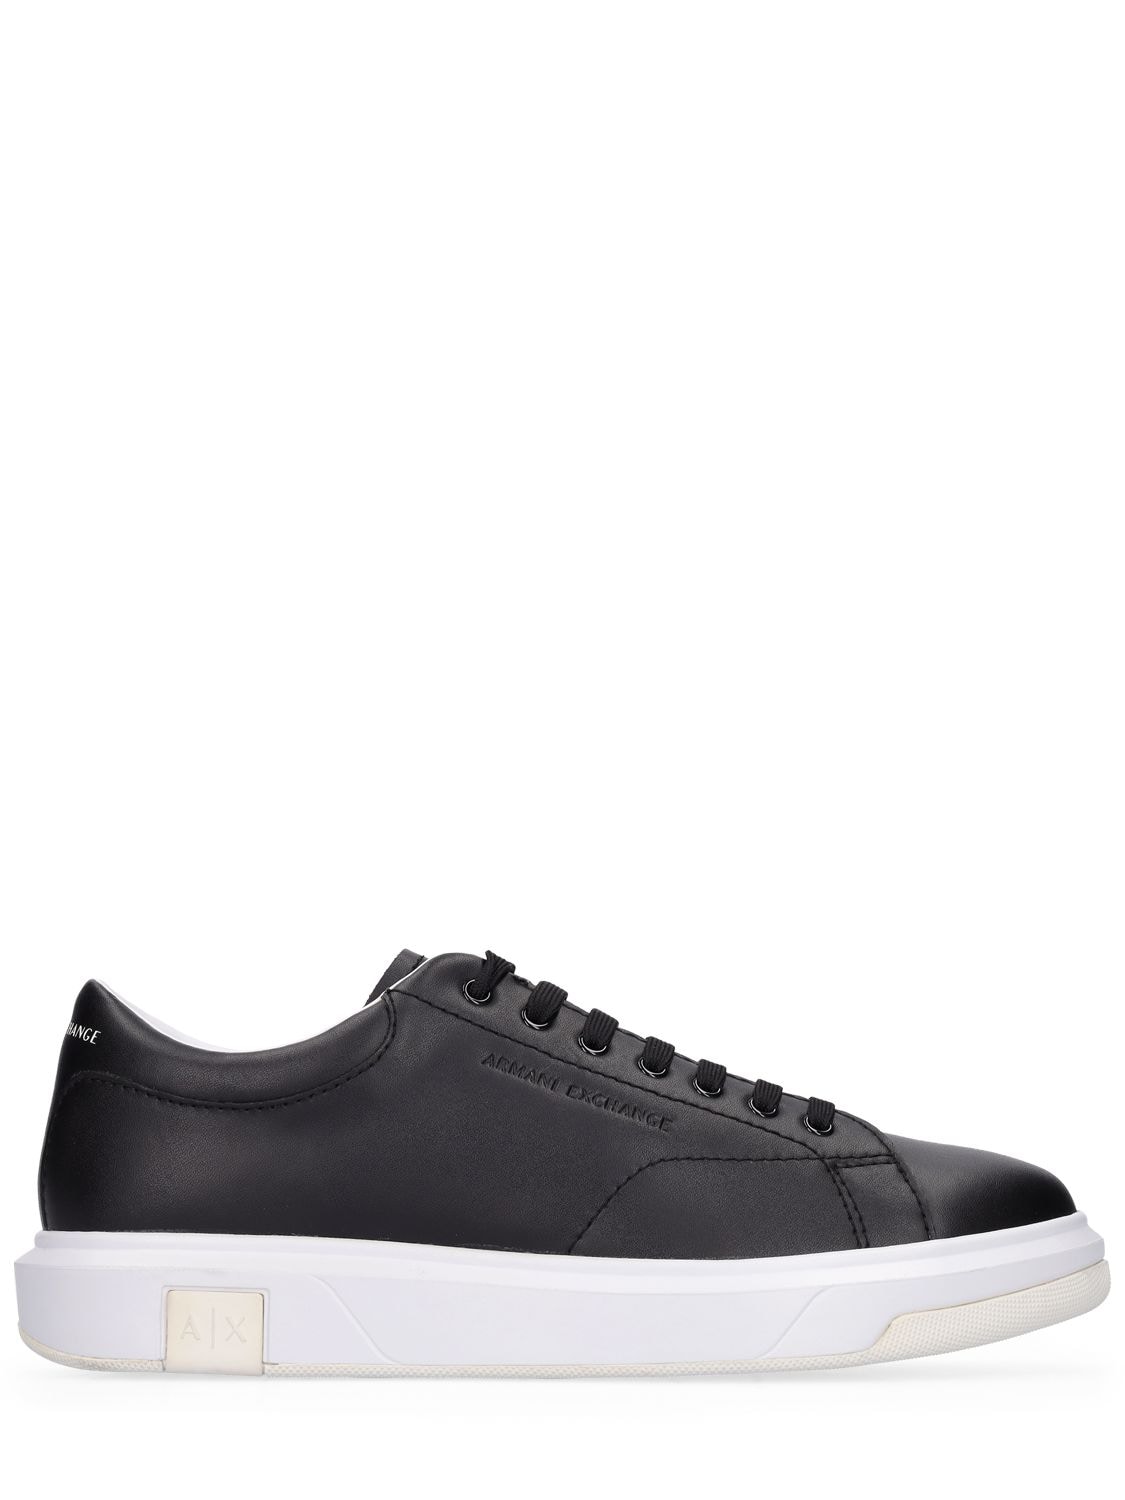 ARMANI EXCHANGE LEATHER LOW TOP SNEAKERS